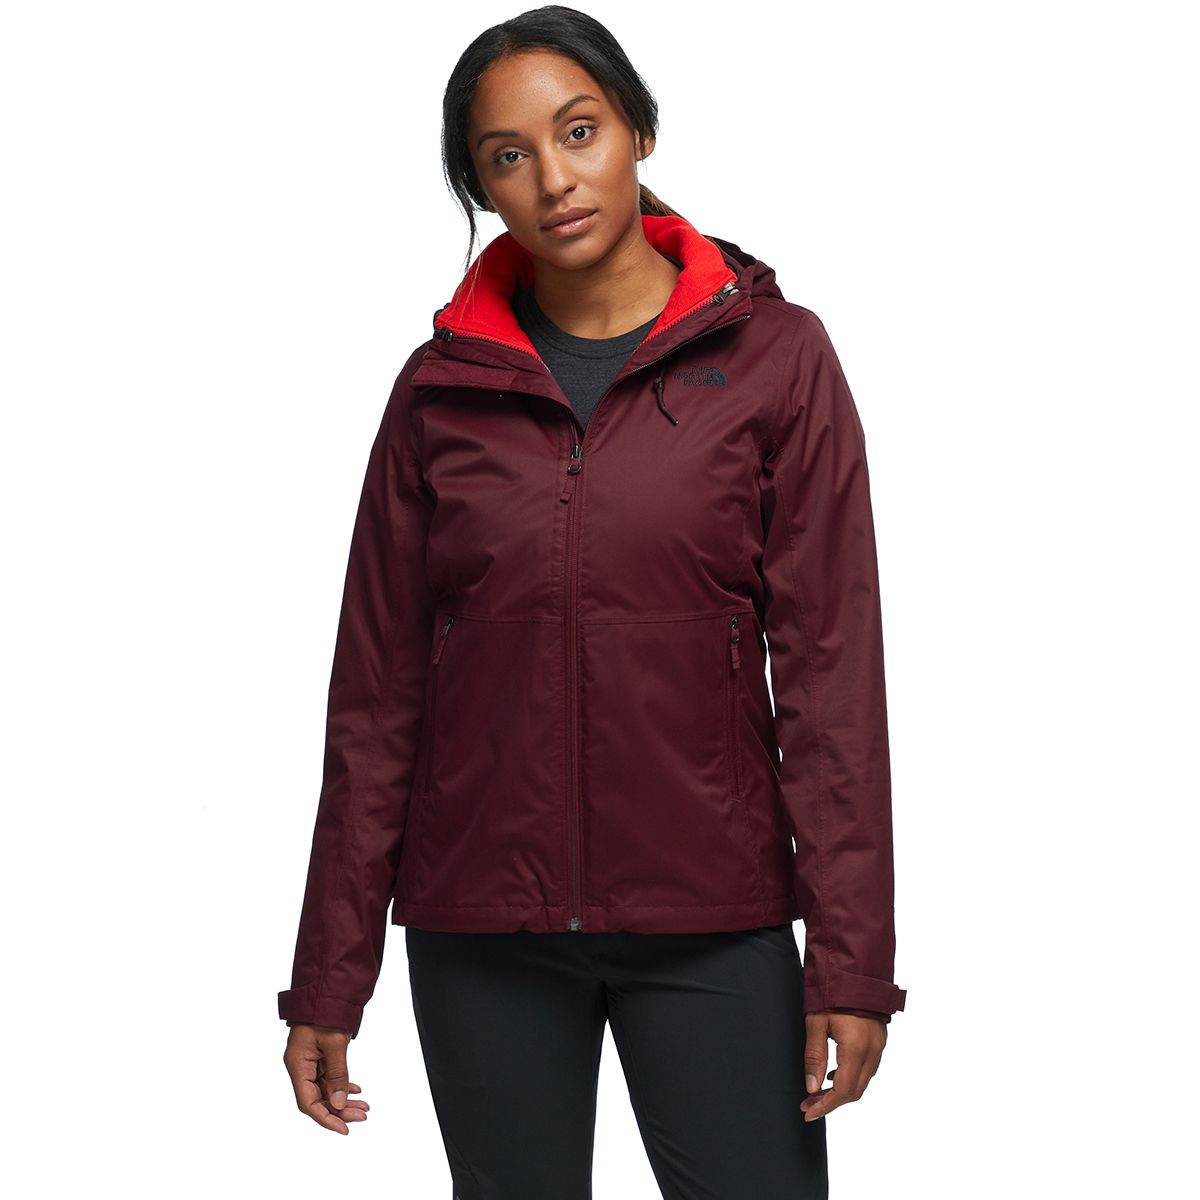 north face arrowood review